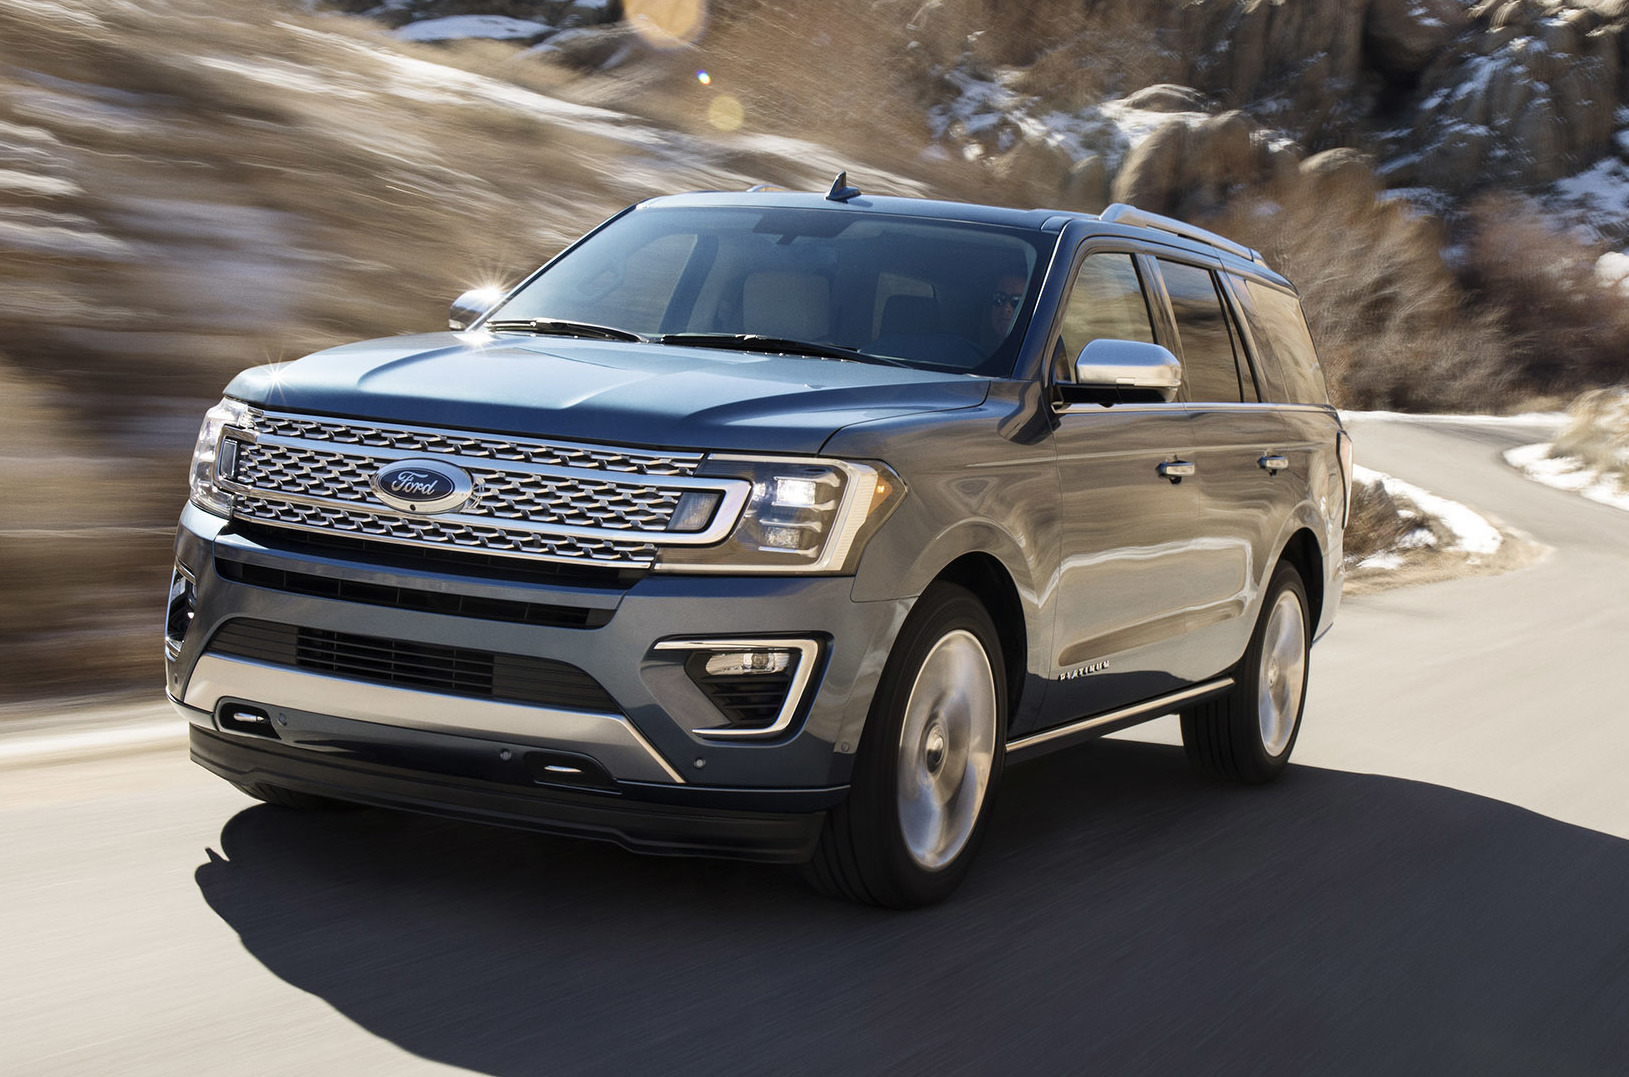 2018 Ford Expedition revealed, up to 136kg lighter PerformanceDrive